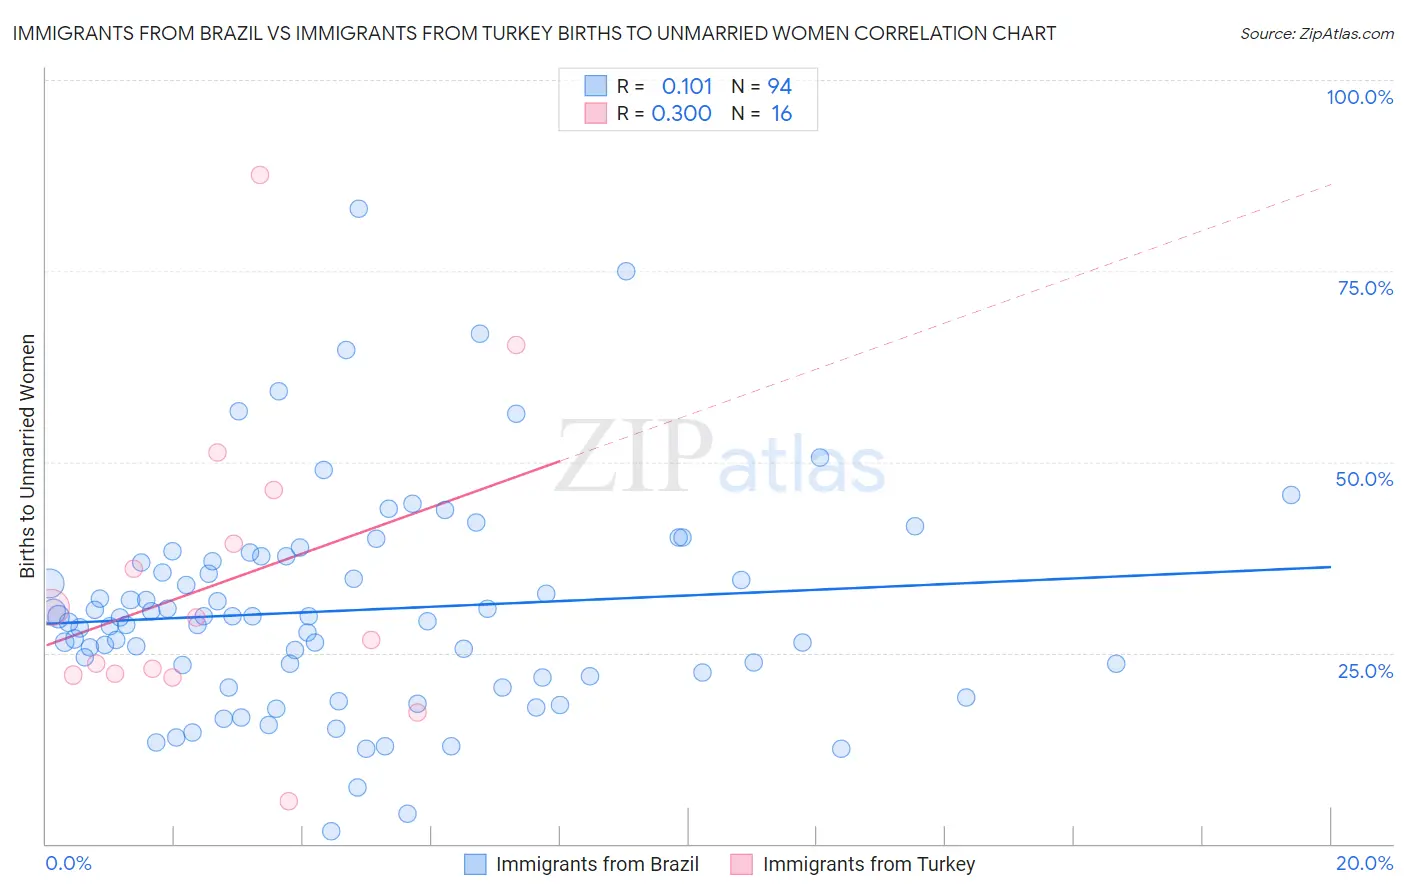 Immigrants from Brazil vs Immigrants from Turkey Births to Unmarried Women